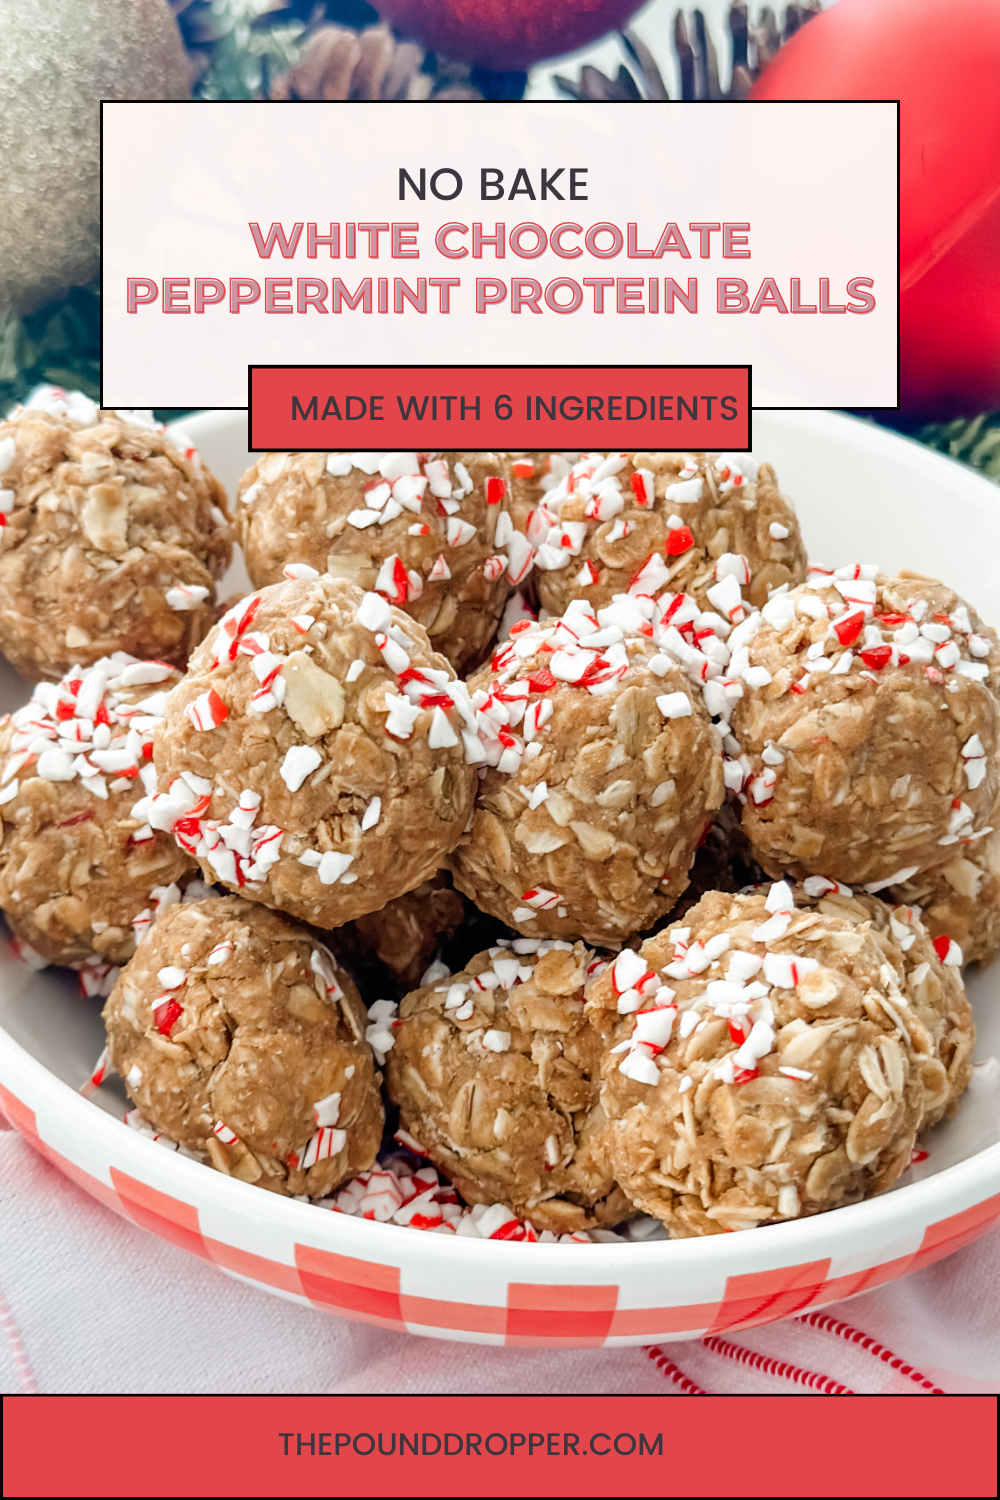 These No Bake White Chocolate Peppermint Protein Balls are the BEST protein packed snack for kids and adults! No Bake Protein Balls have been a life saver on busy days when I just don’t have time to sit down and eat something.  I love meal prepping recipes like these so that we can have a quick and easy snack for those busy days!  via @pounddropper